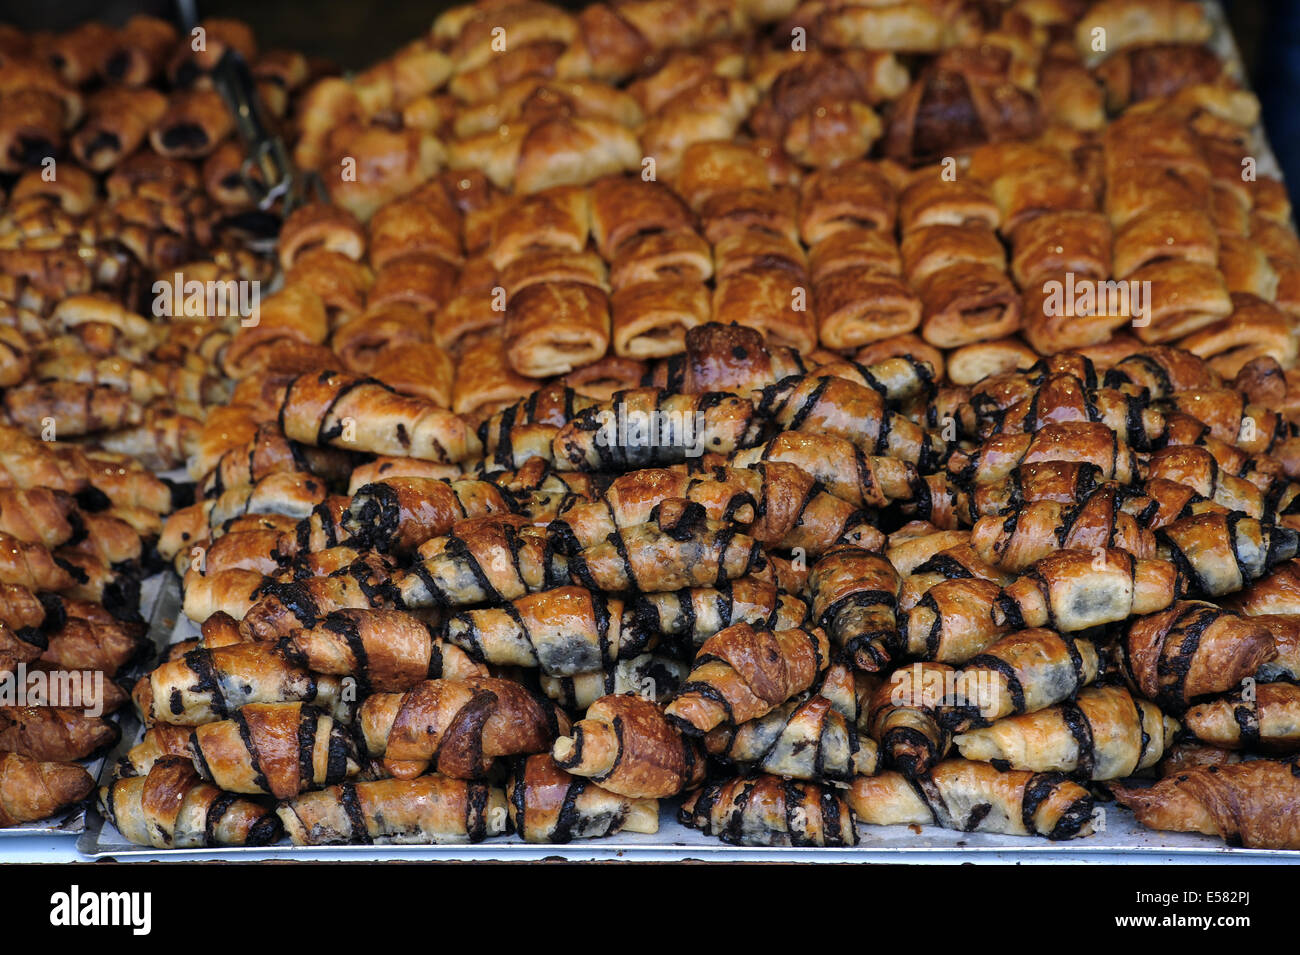 Chocolate pastries on a stand for sale at Machane Yehuda market, Jerusalem, Israel Stock Photo